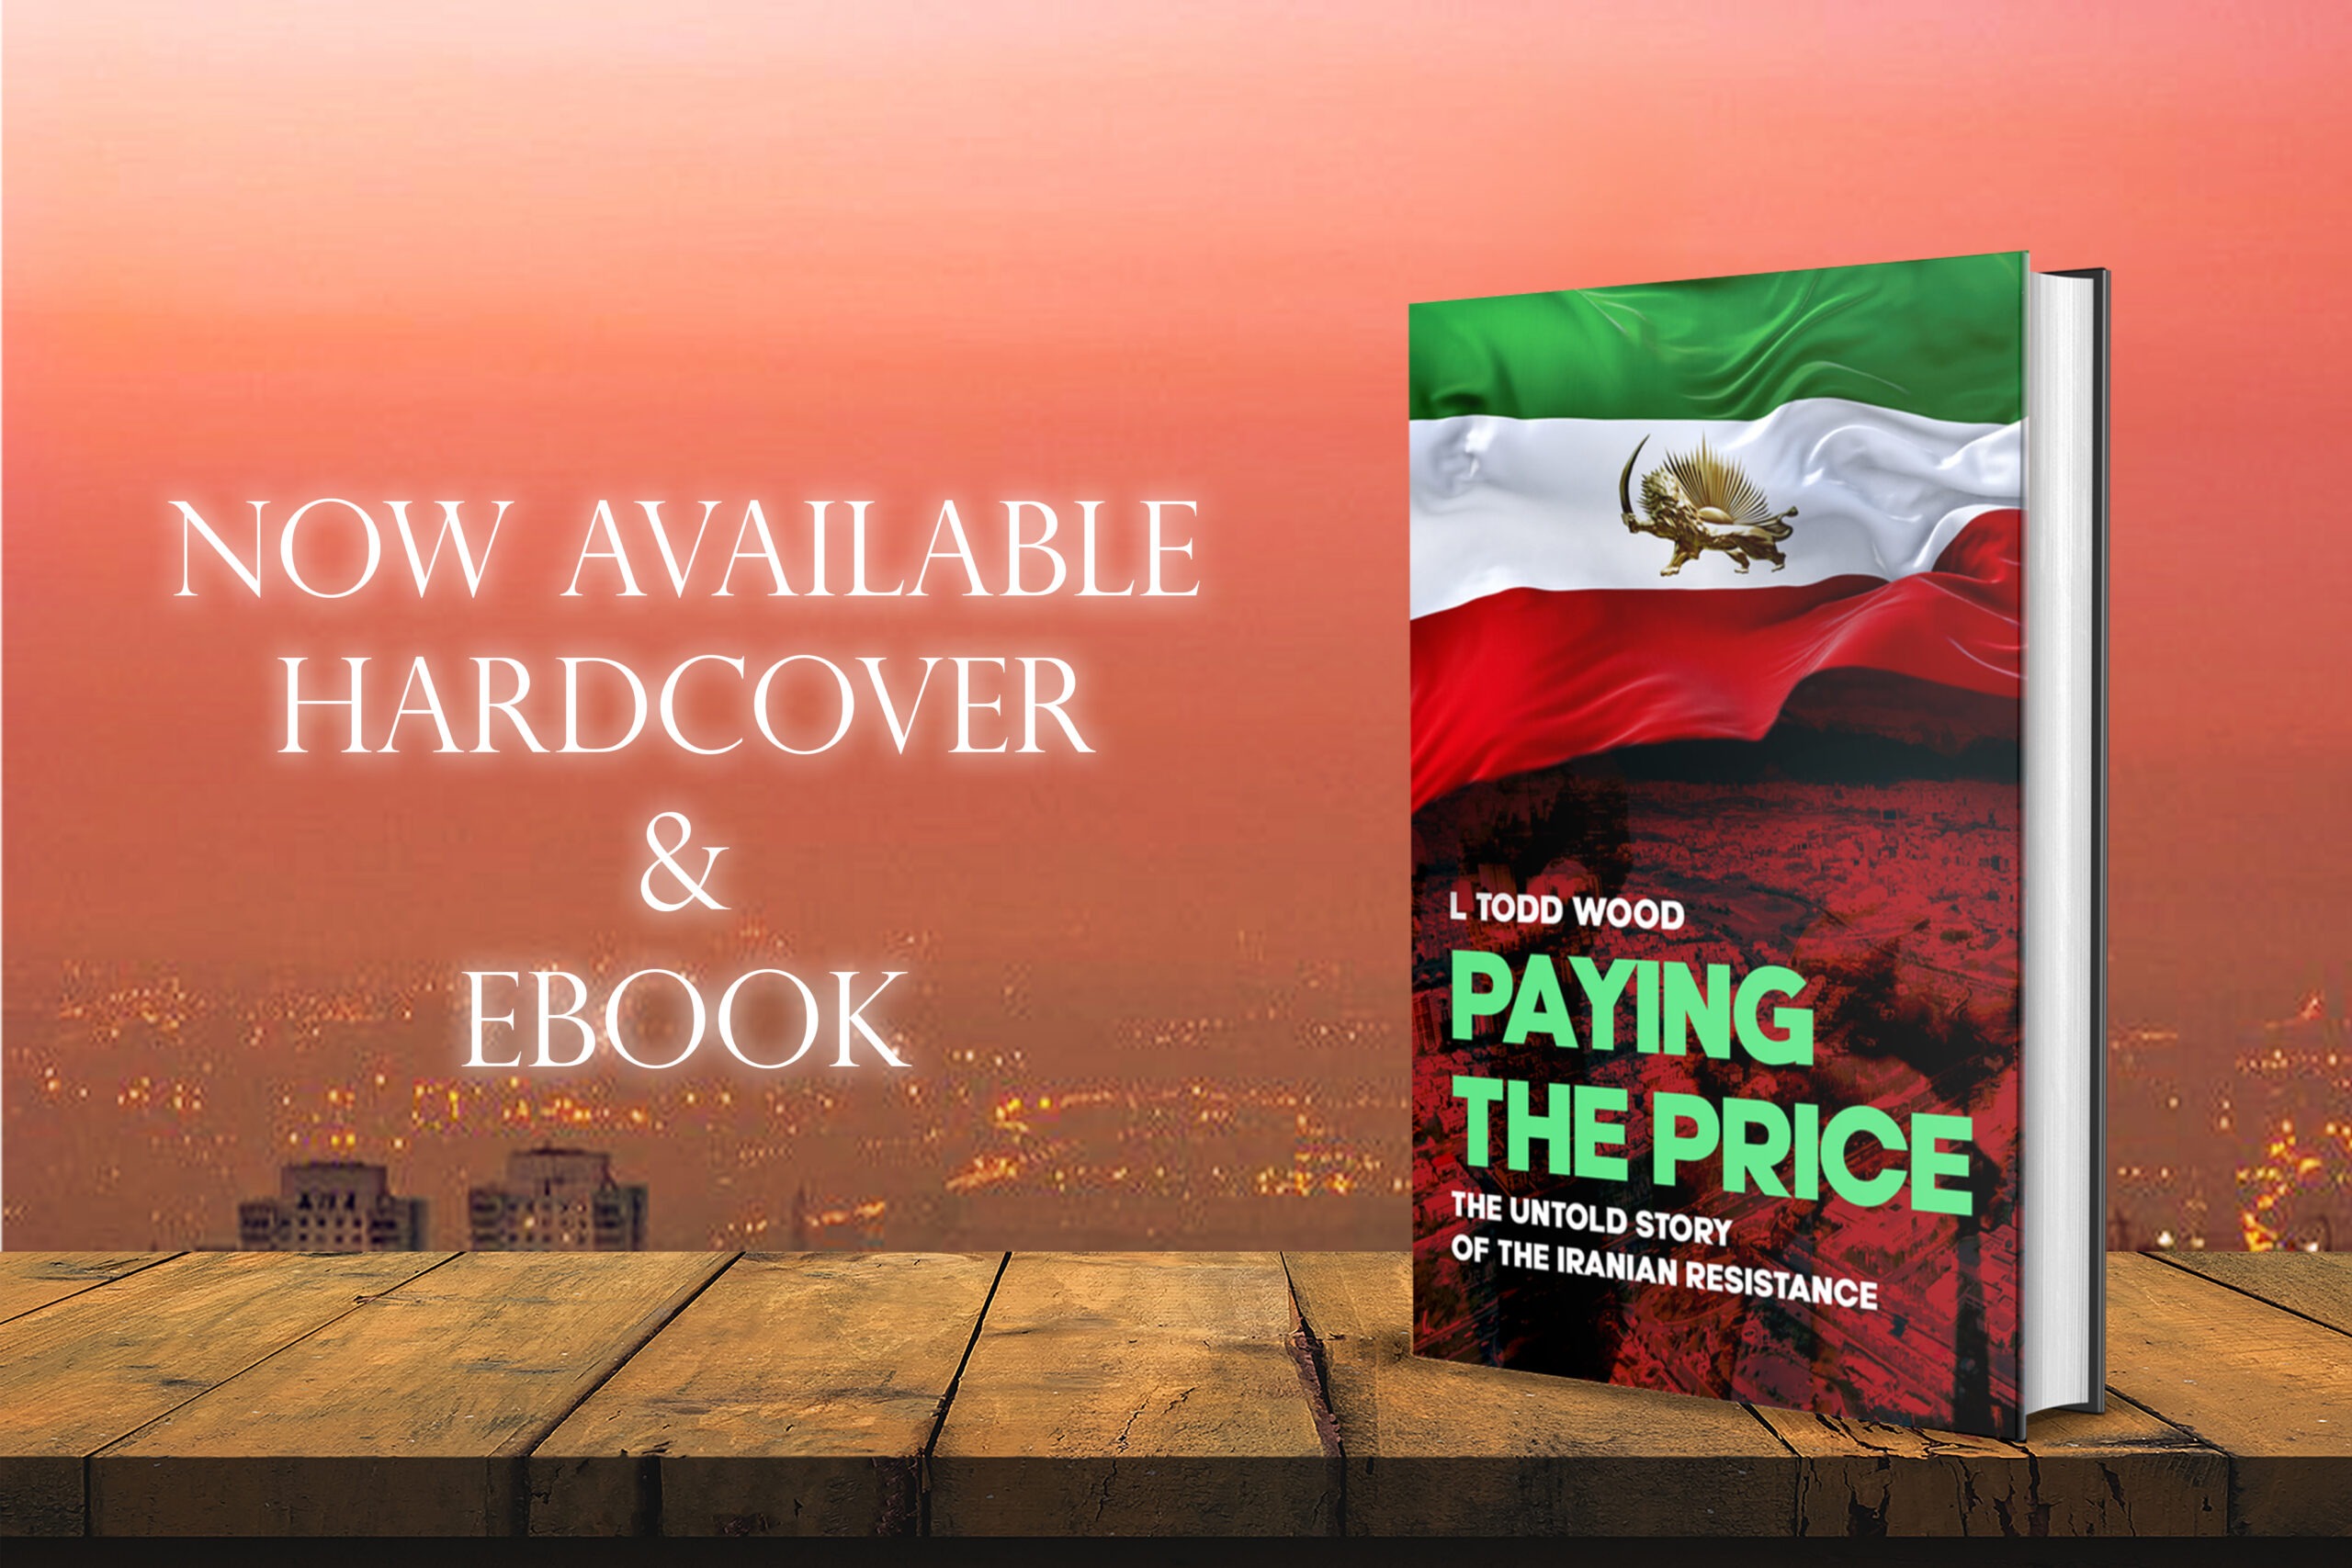 Paying the Price by L Todd Wood